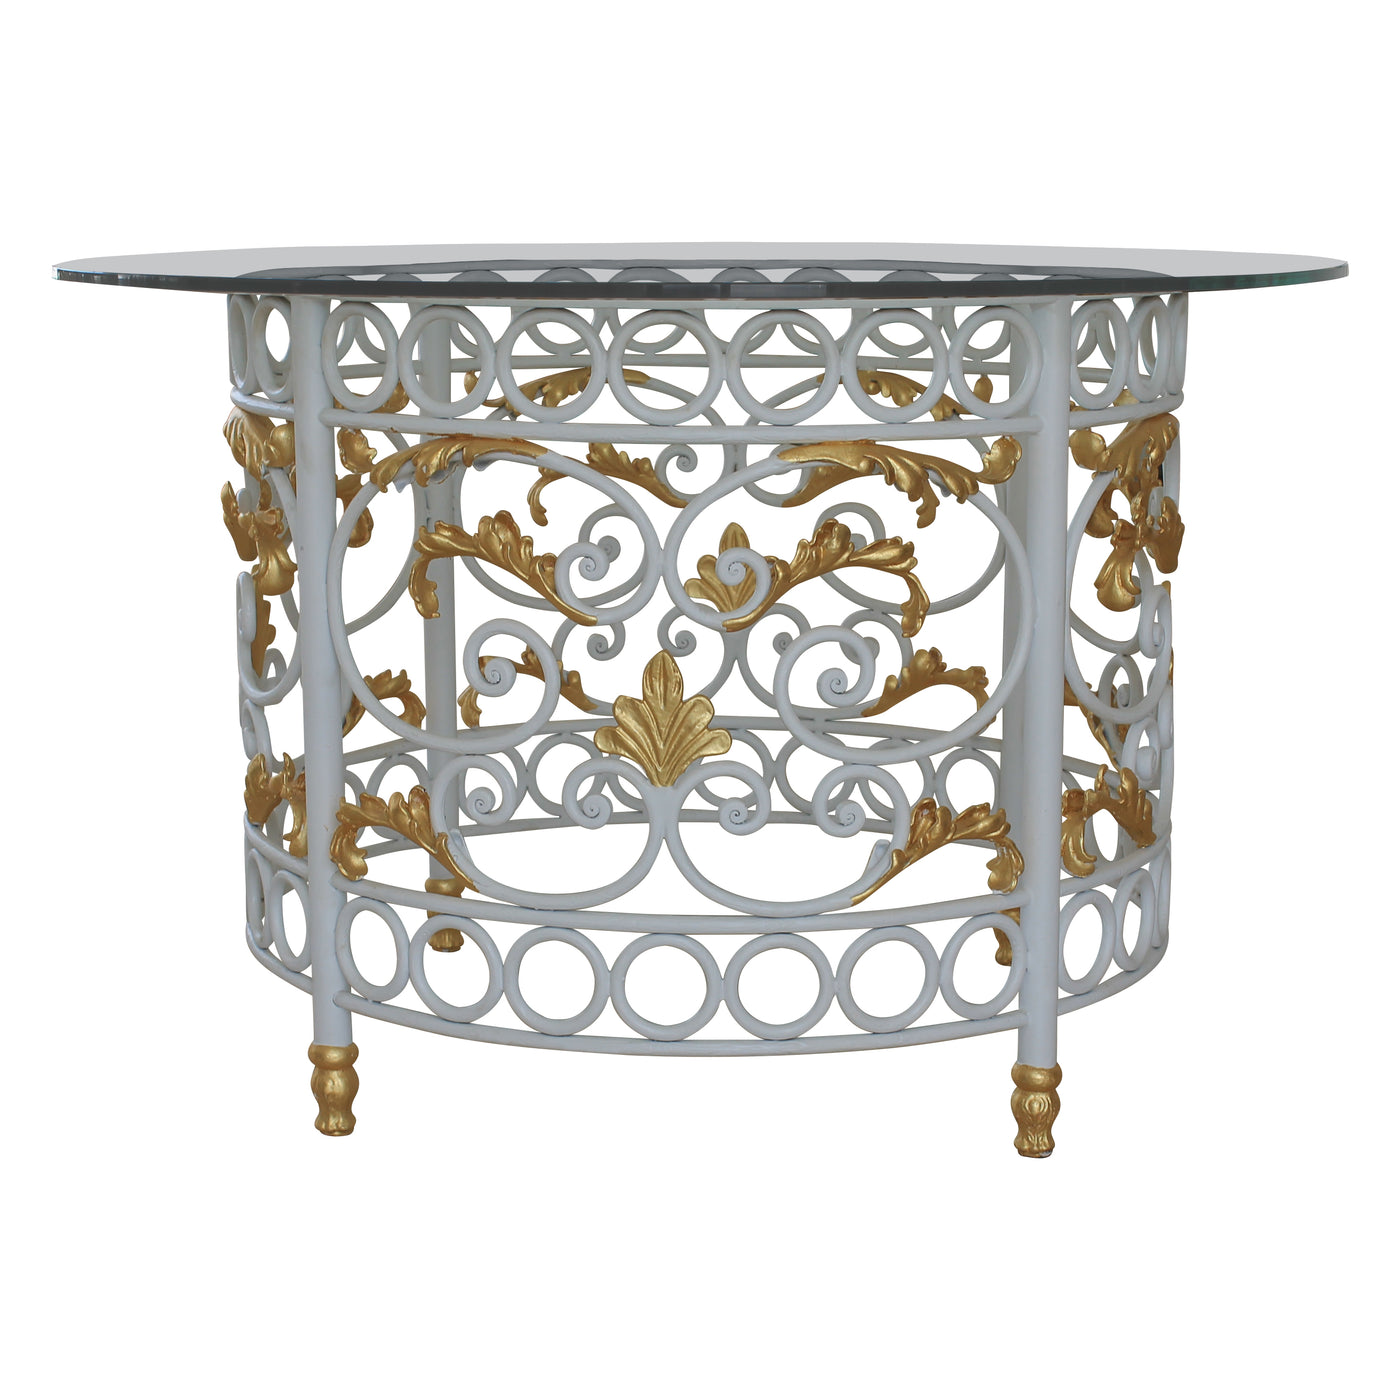 A round lobby table with a classical wrought iron base with white scrolls and golden leaves, topped with a clear circular glass